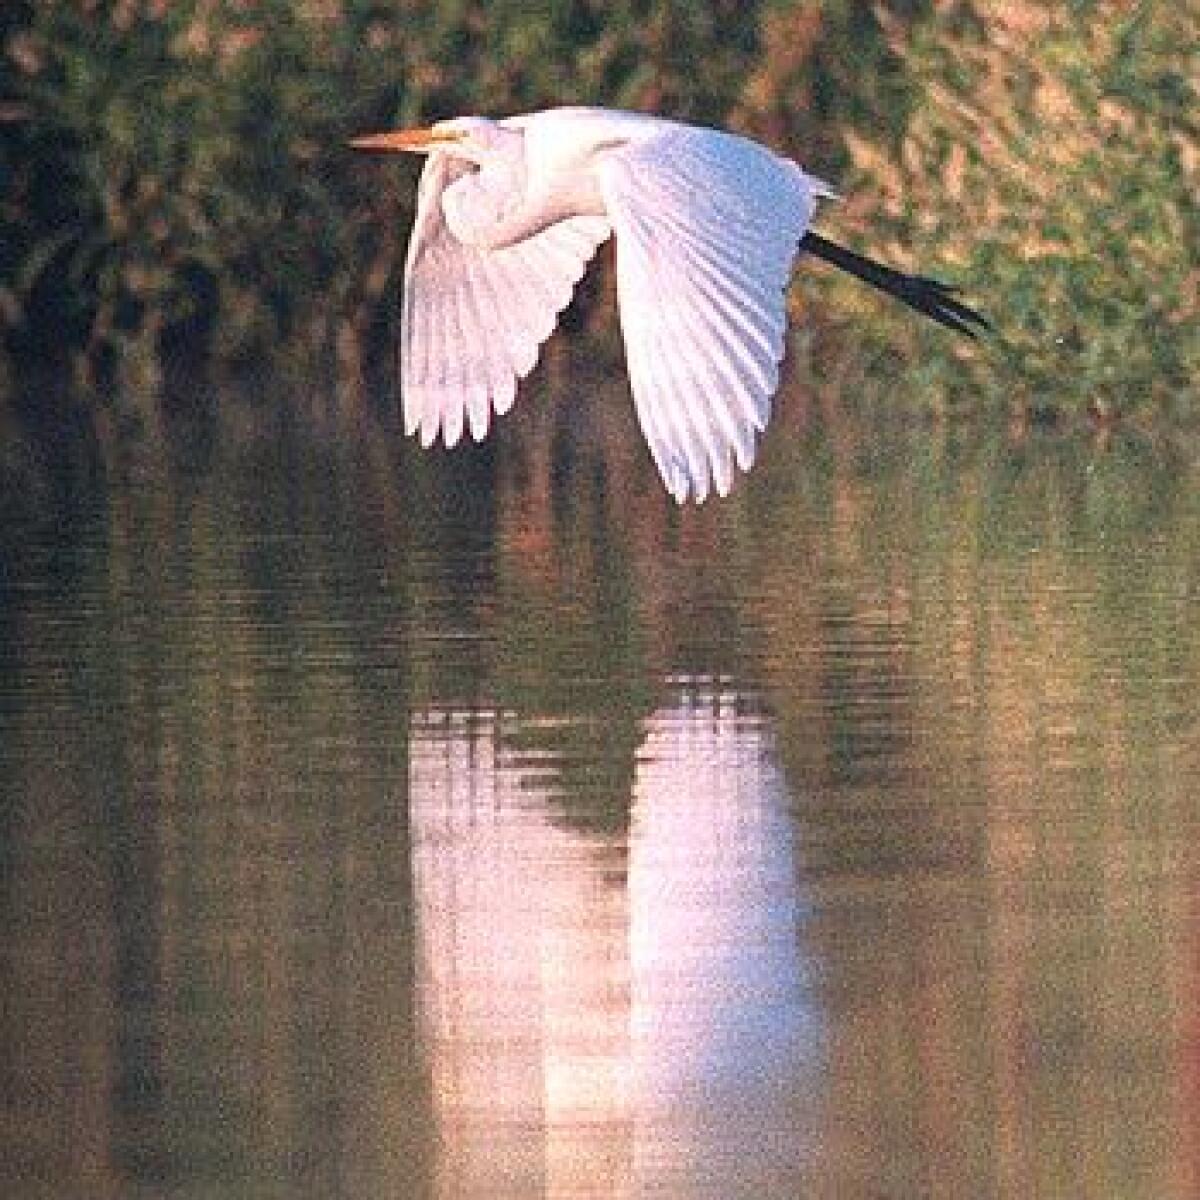 Some 240 winged species, including great egrets, frequent the Sepulveda Basin Wildlife Reserve.